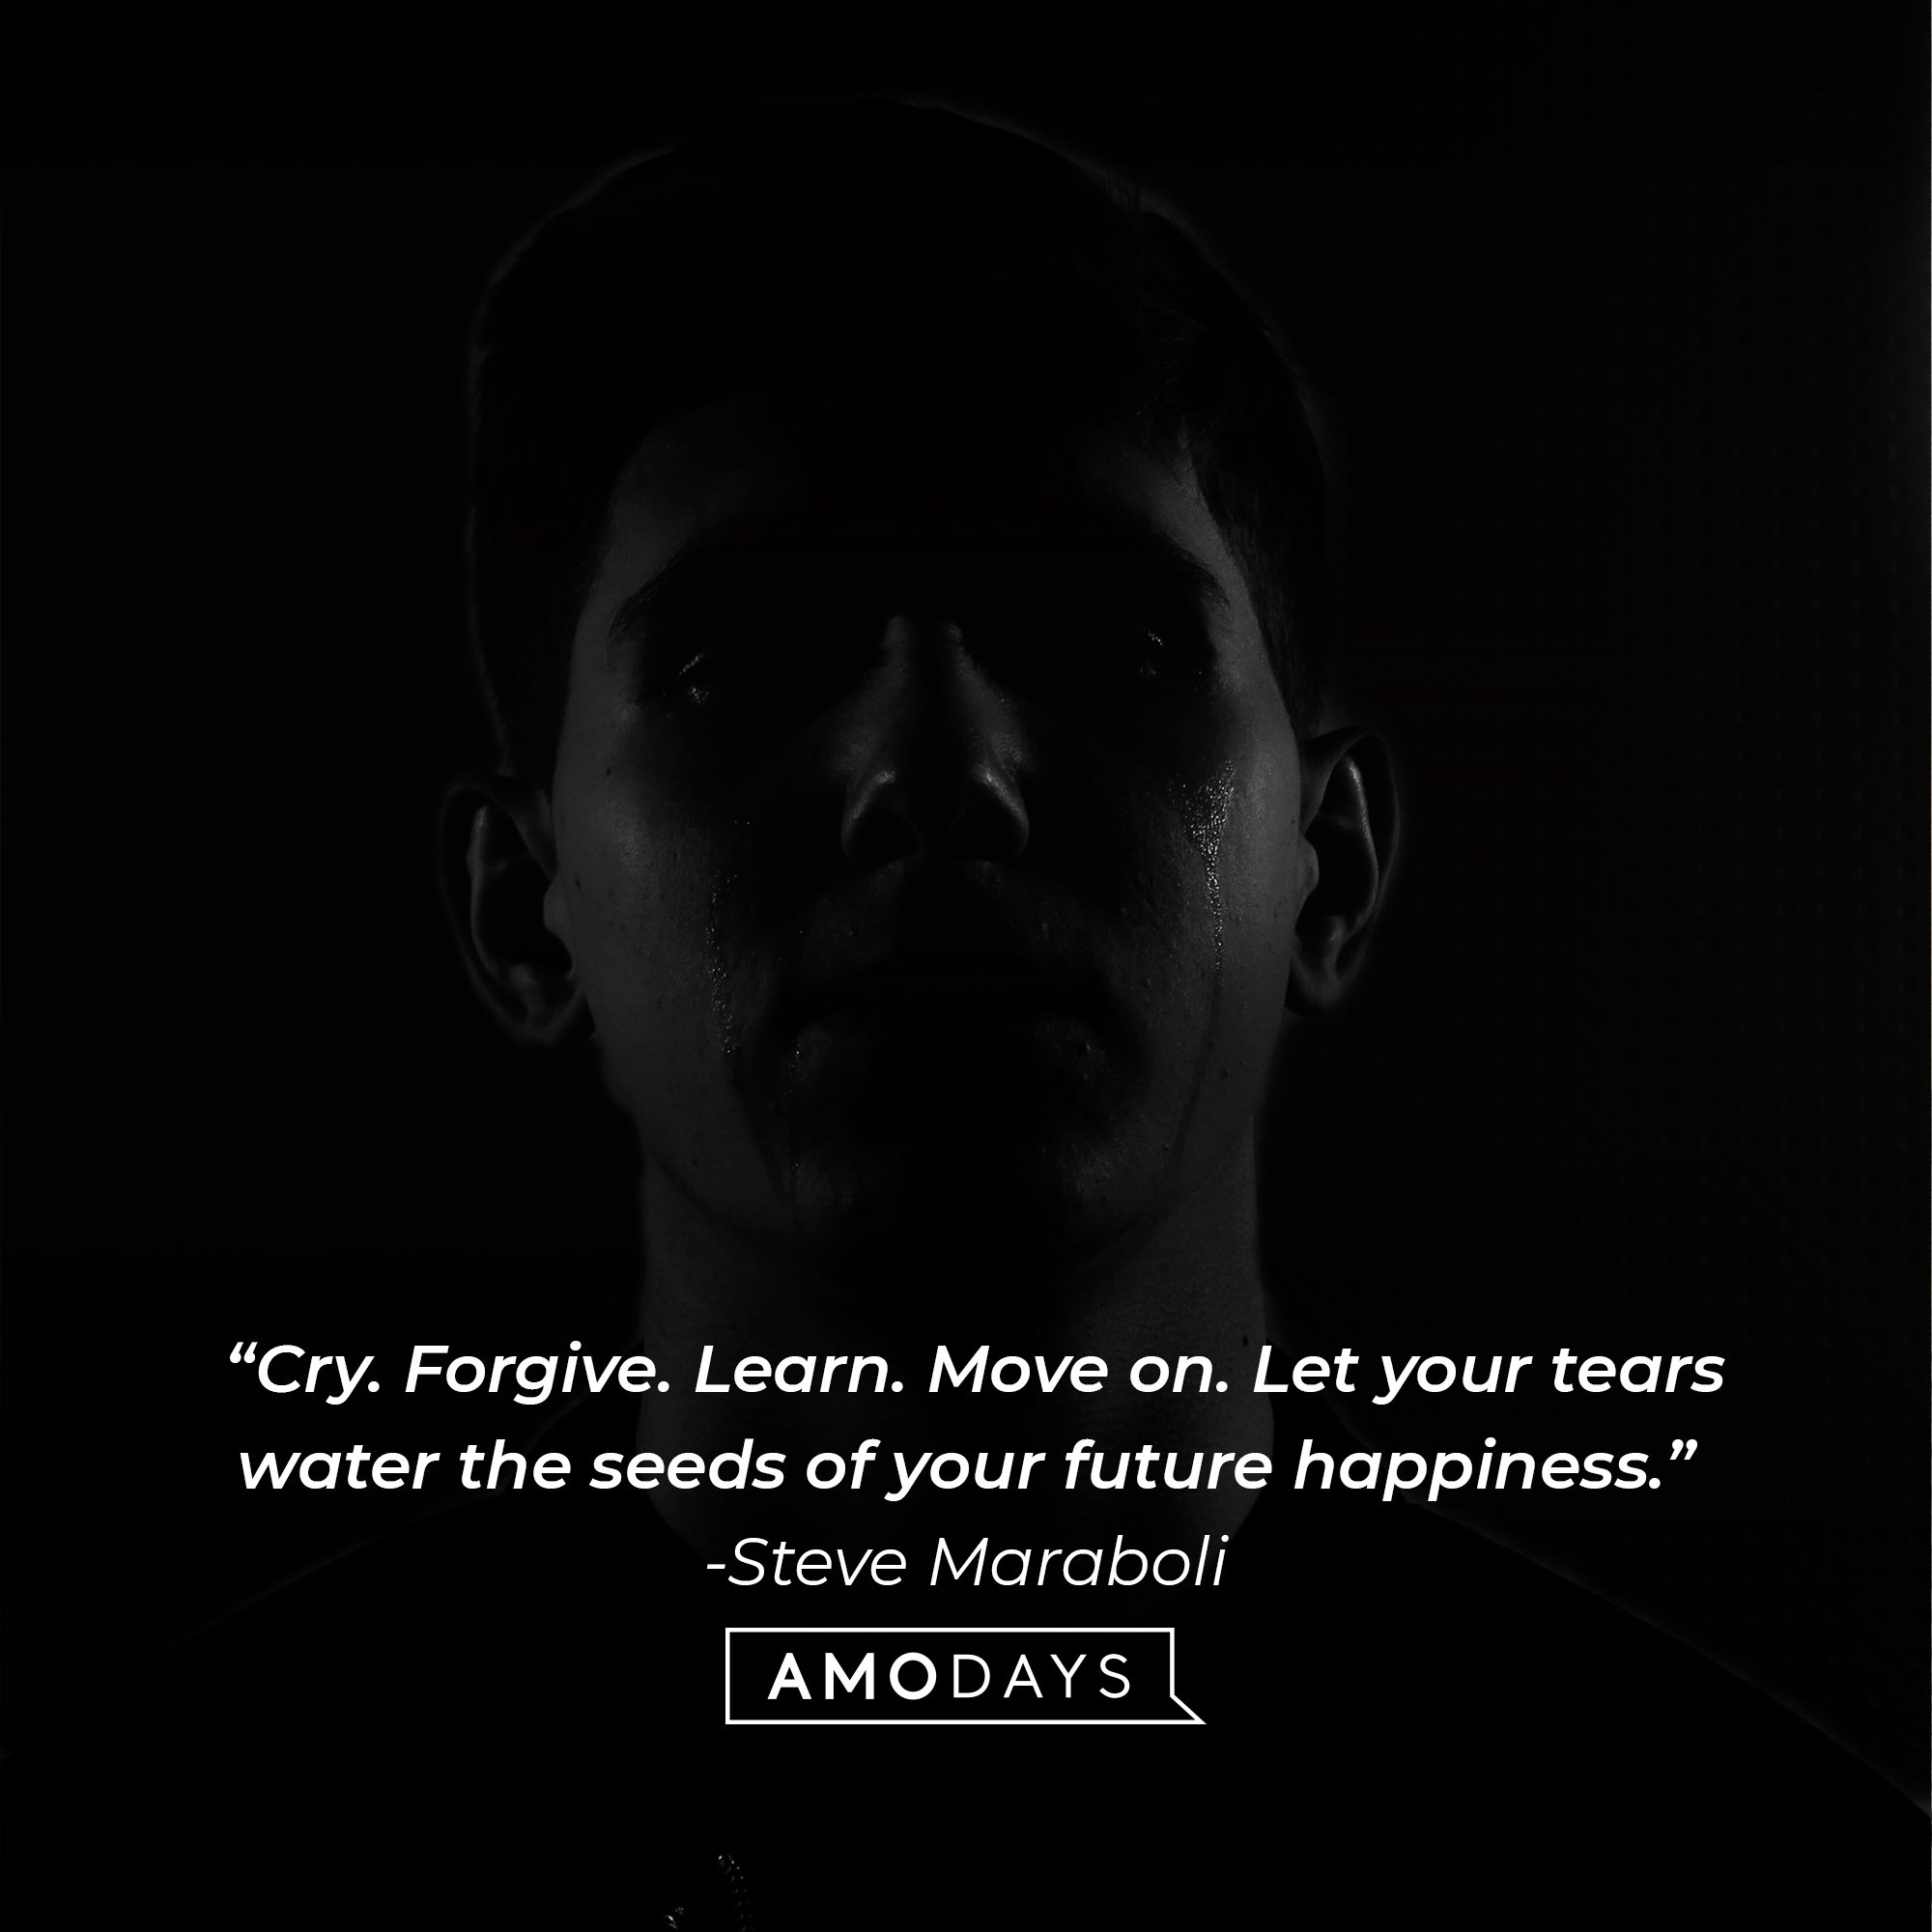 Steve Maraboli's quote: “Cry. Forgive. Learn. Move on. Let your tears water the seeds of your future happiness.” | Image: AmoDays